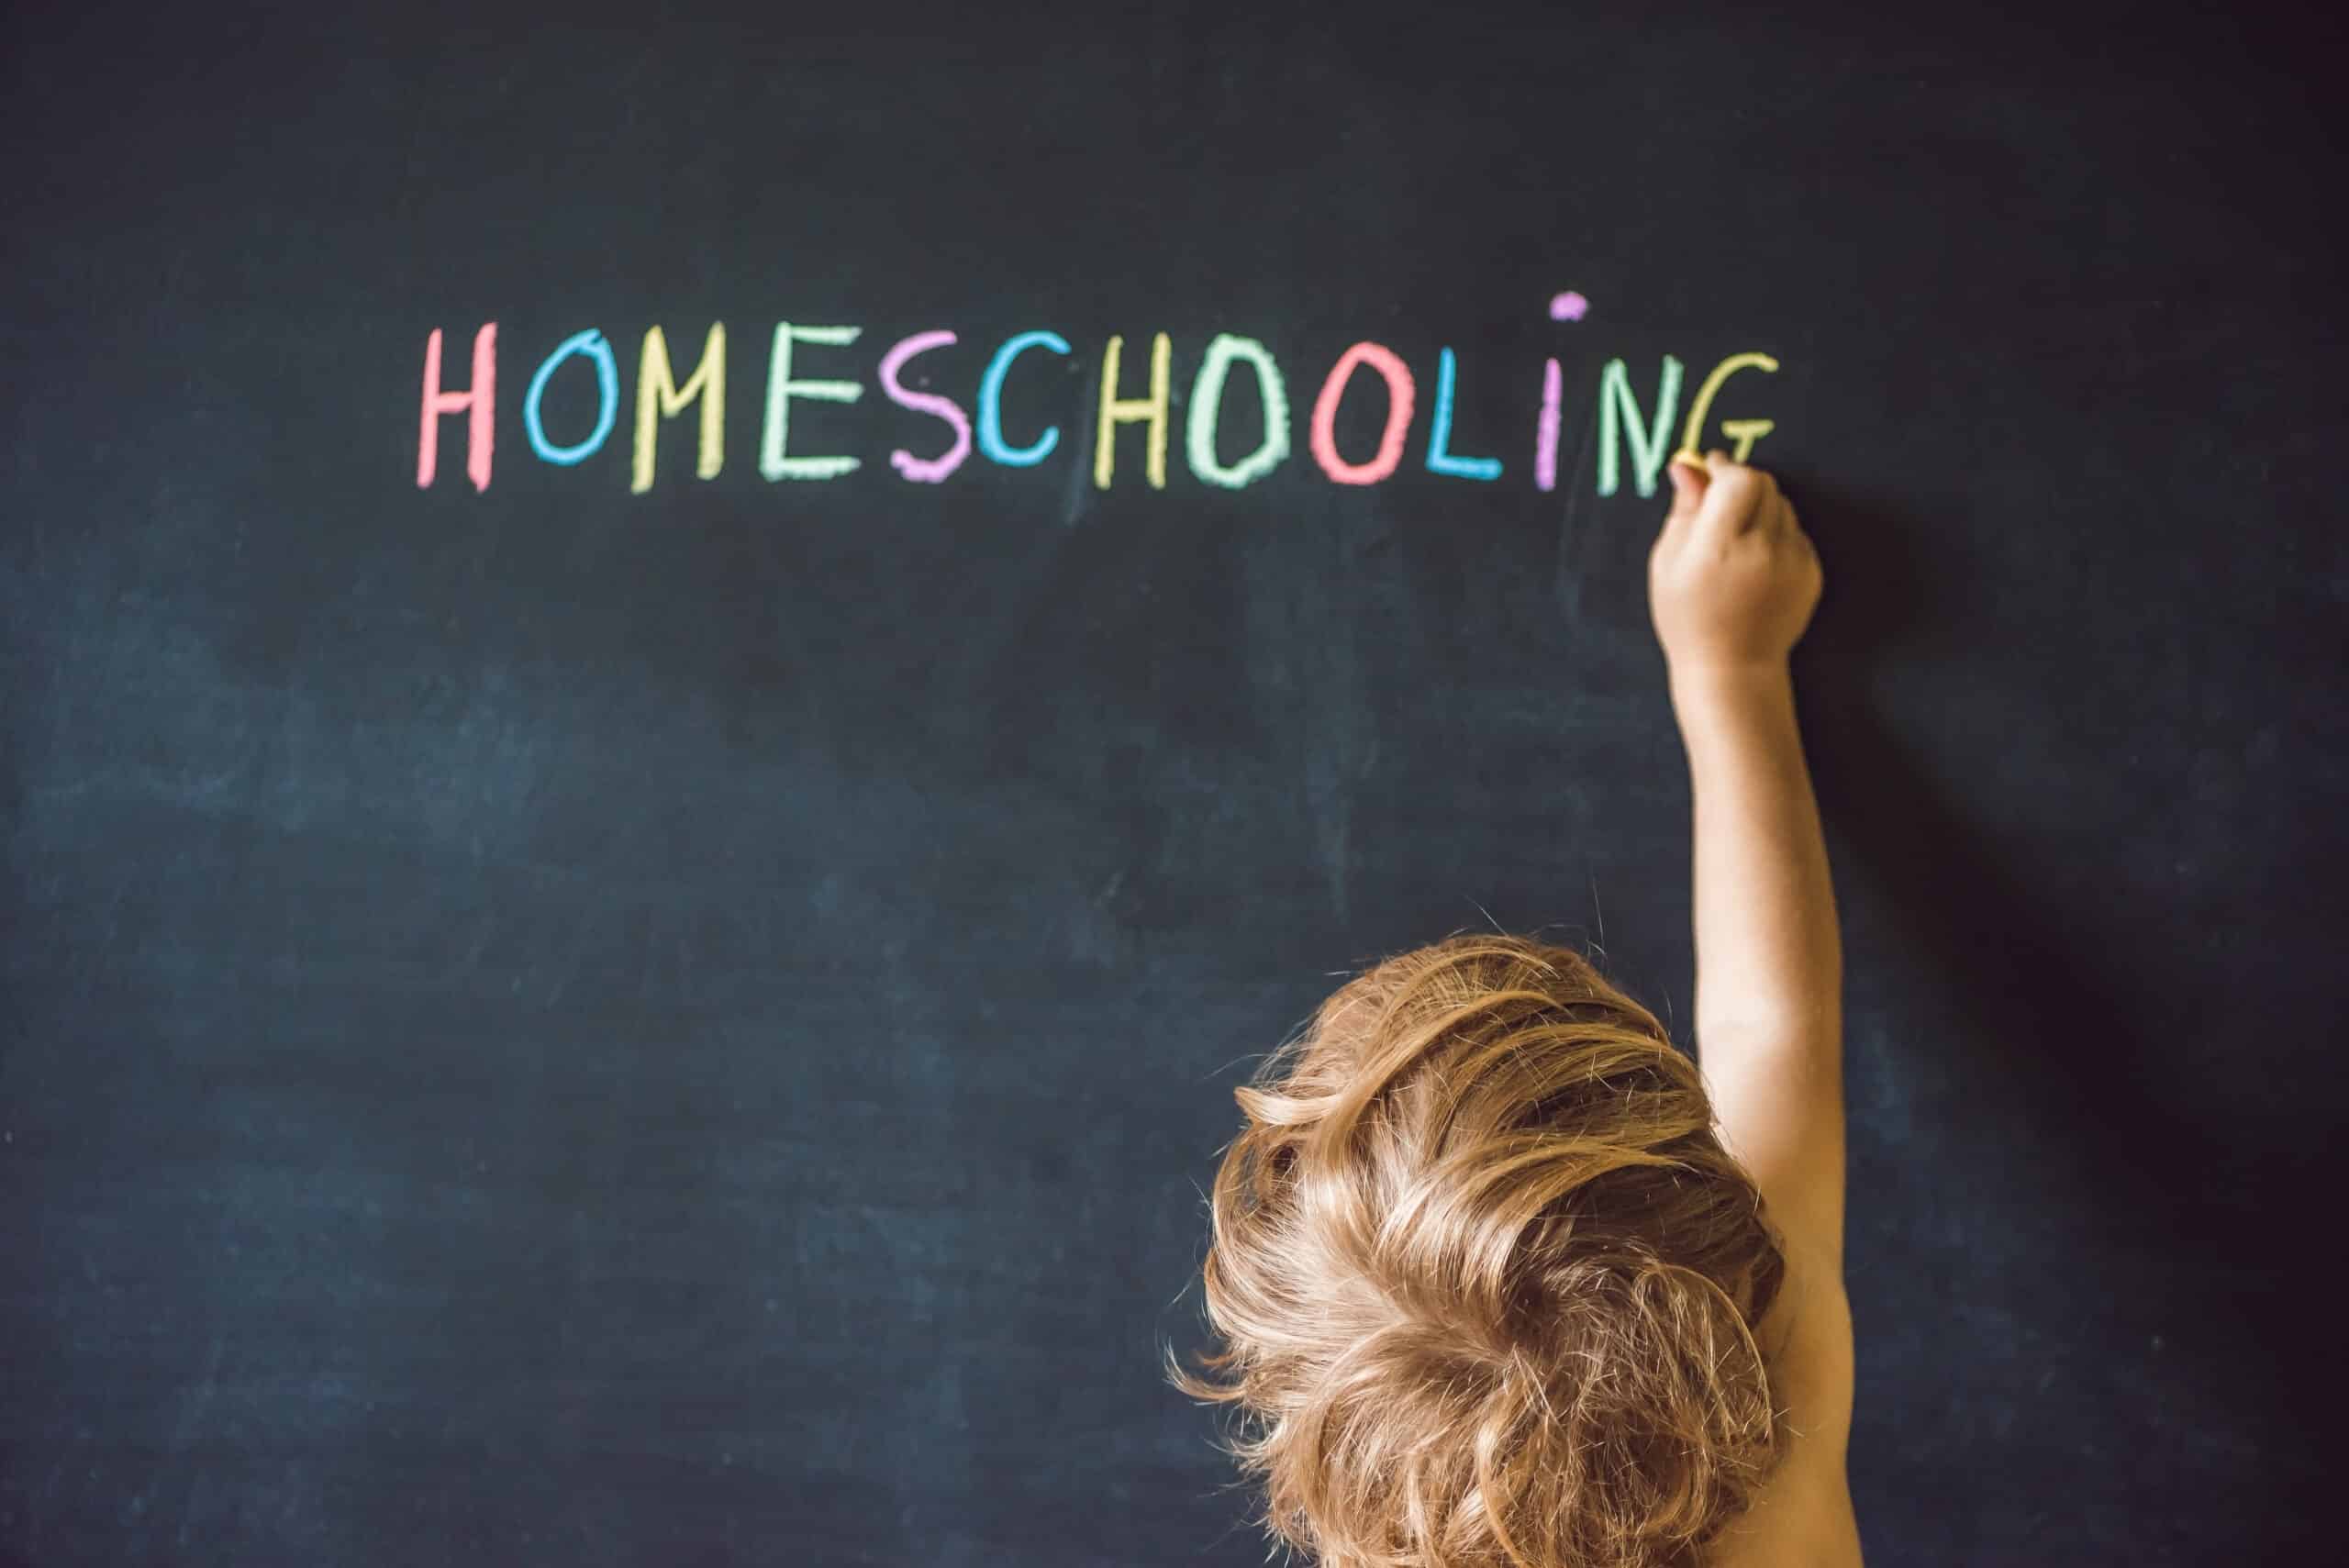 A light-skinned child with honey-brown hair, bottom center/right frame, facing away from the camera is visible holding a piece of chalk in their right hand, up tho a chalkboard as if finishing writing the word HOMESCHOOLING. HOMESCHOOLING is written on a blackboard which also serves as the background. The letters in HOMESCHOOLING are written in different colors - H,S, the third O, and I are pink, The first O, C, and L are blue. The E, the second O, and the N are light green/white, and the M,H, G are yellow.